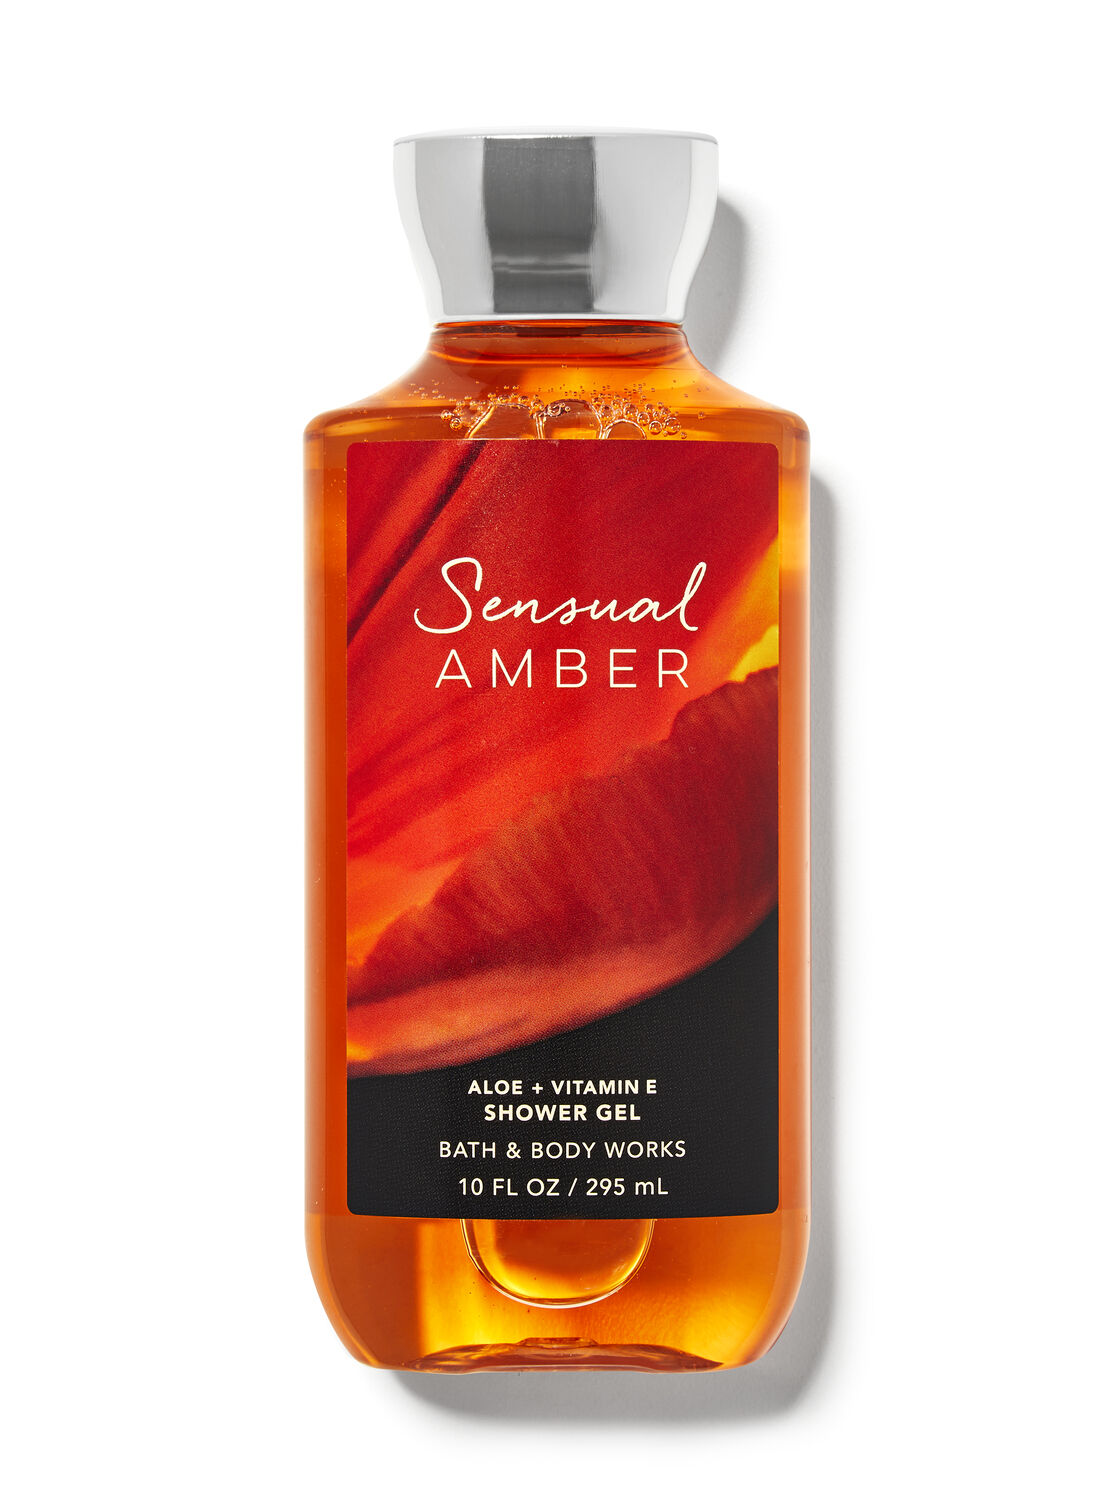 Bath & Body Works FLASH SALE Update + Sensual Amber Review! 